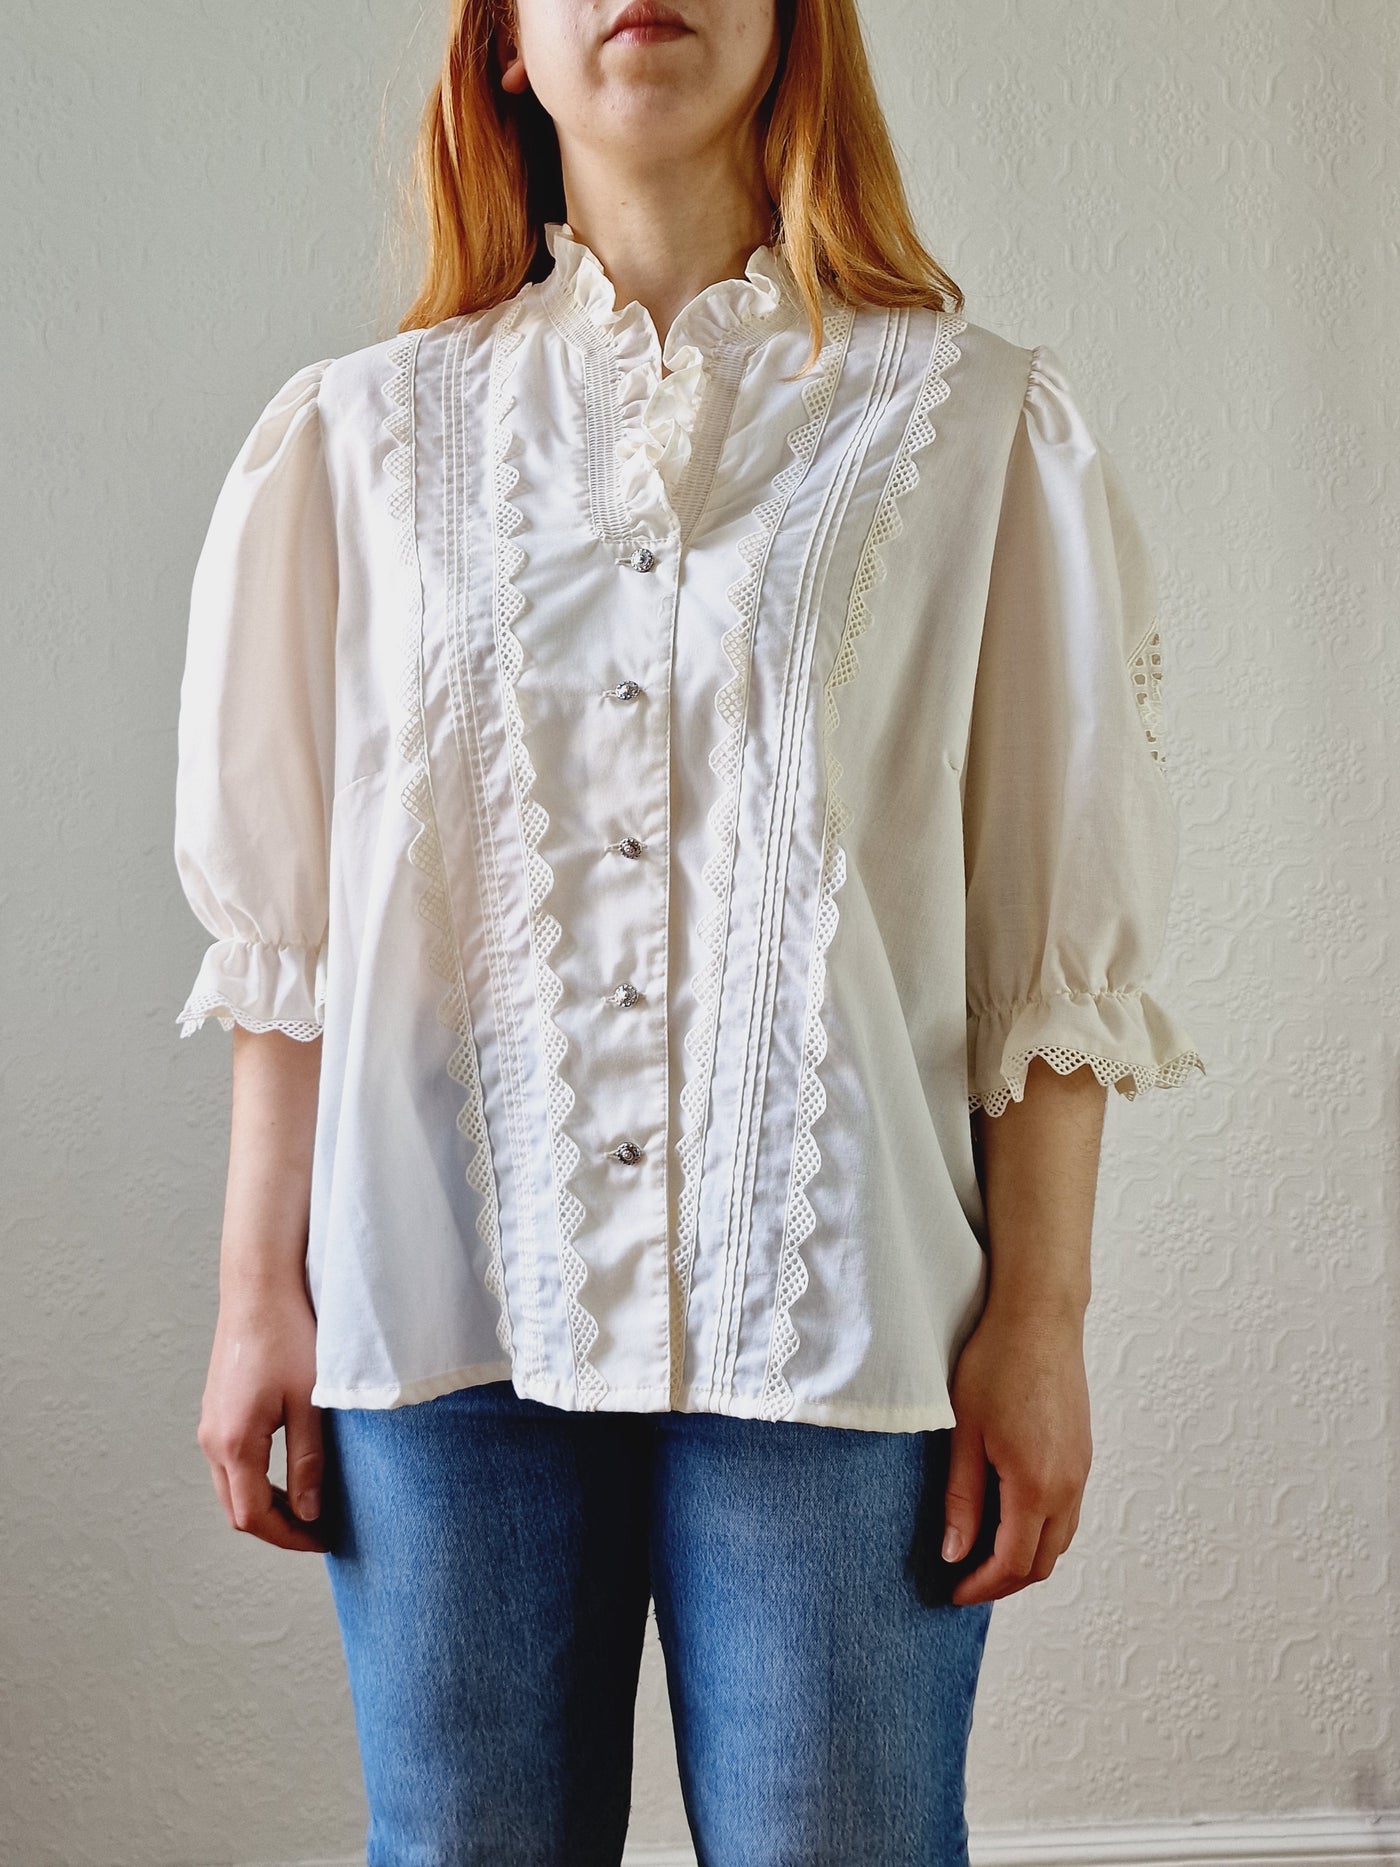 Vintage Cream Austrian Broderie Anglaise Dirndl Blouse with Puff Sleeves - XL